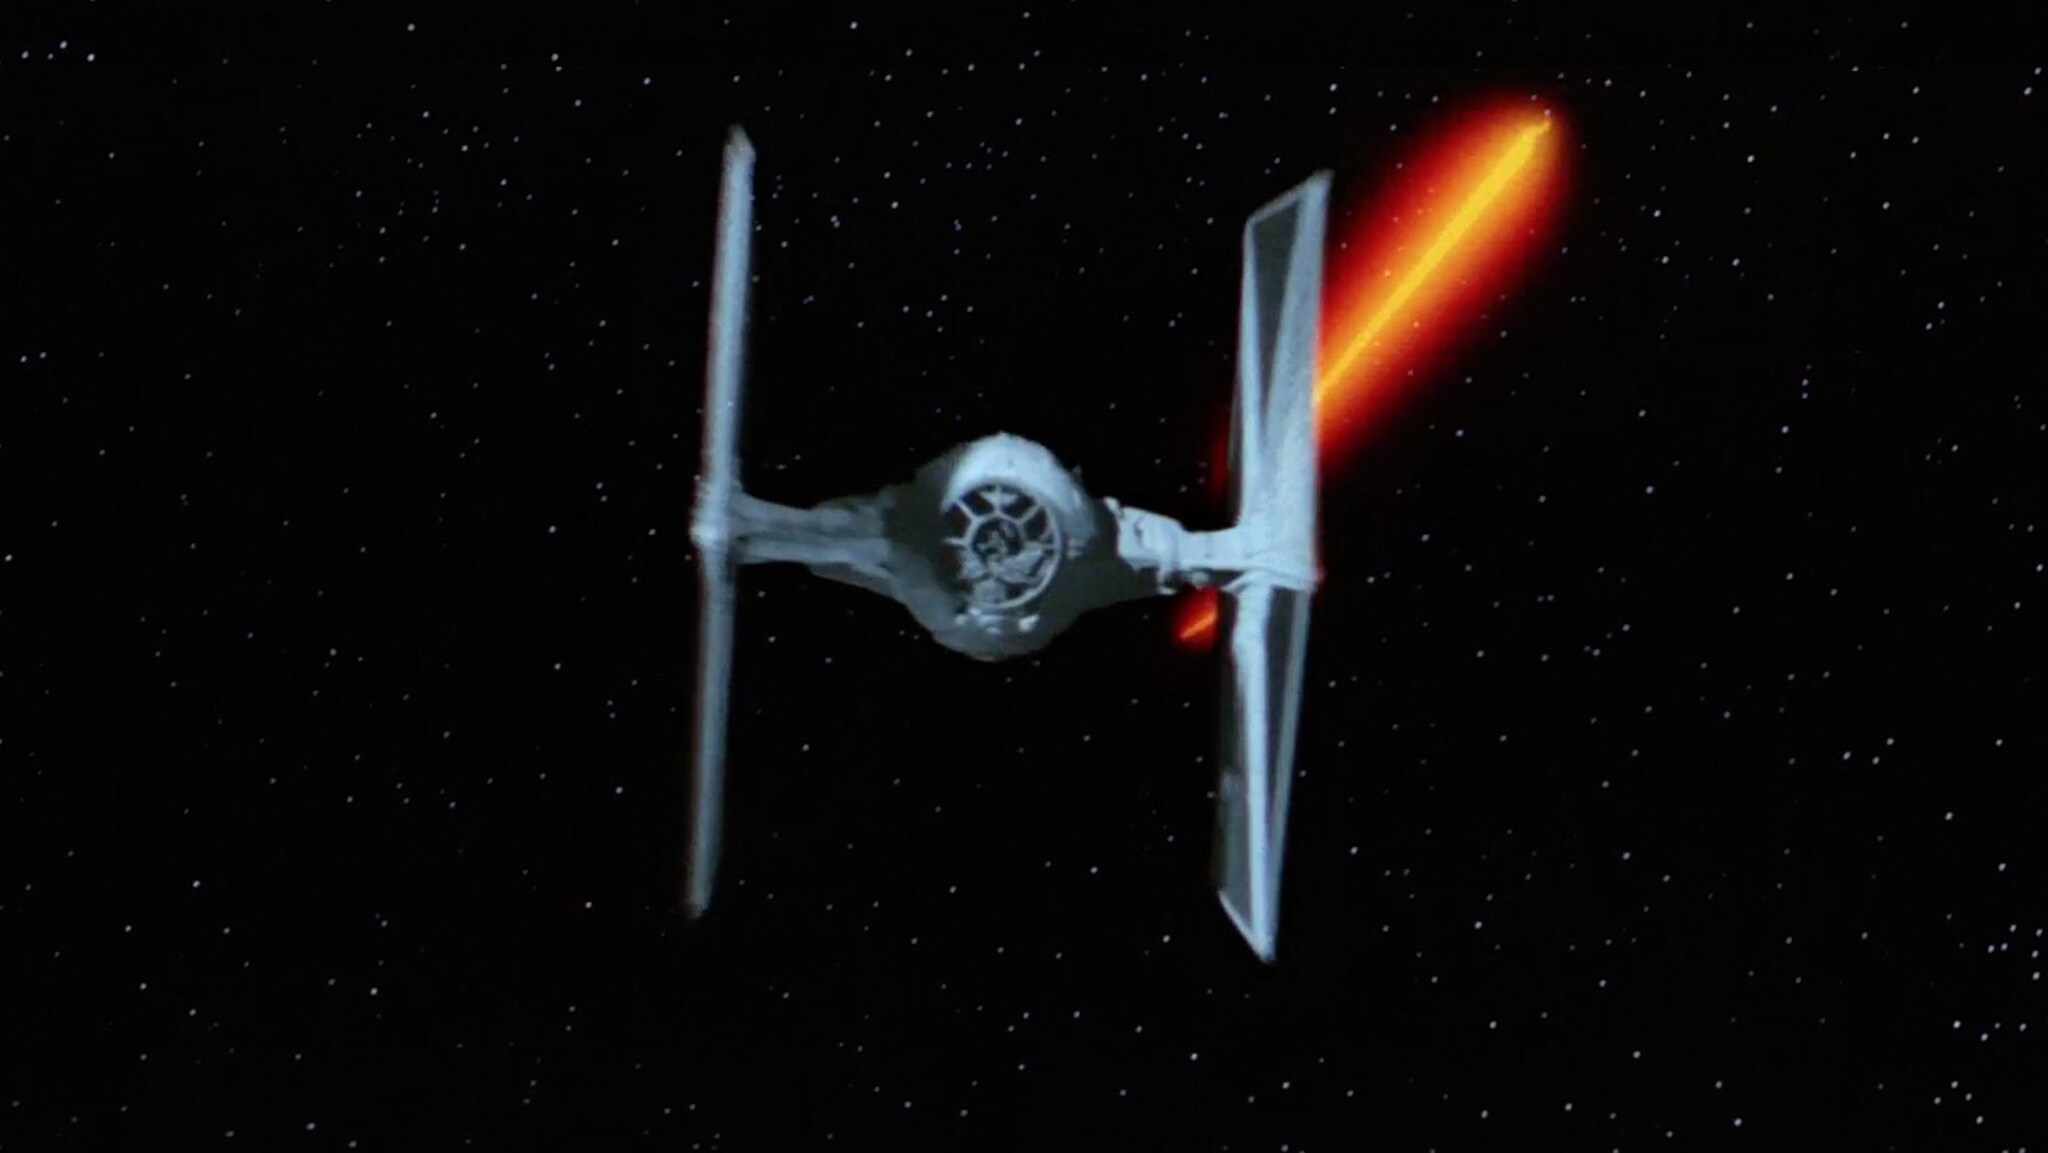 The Imperial TIE fighter from Star Wars: A New Hope.